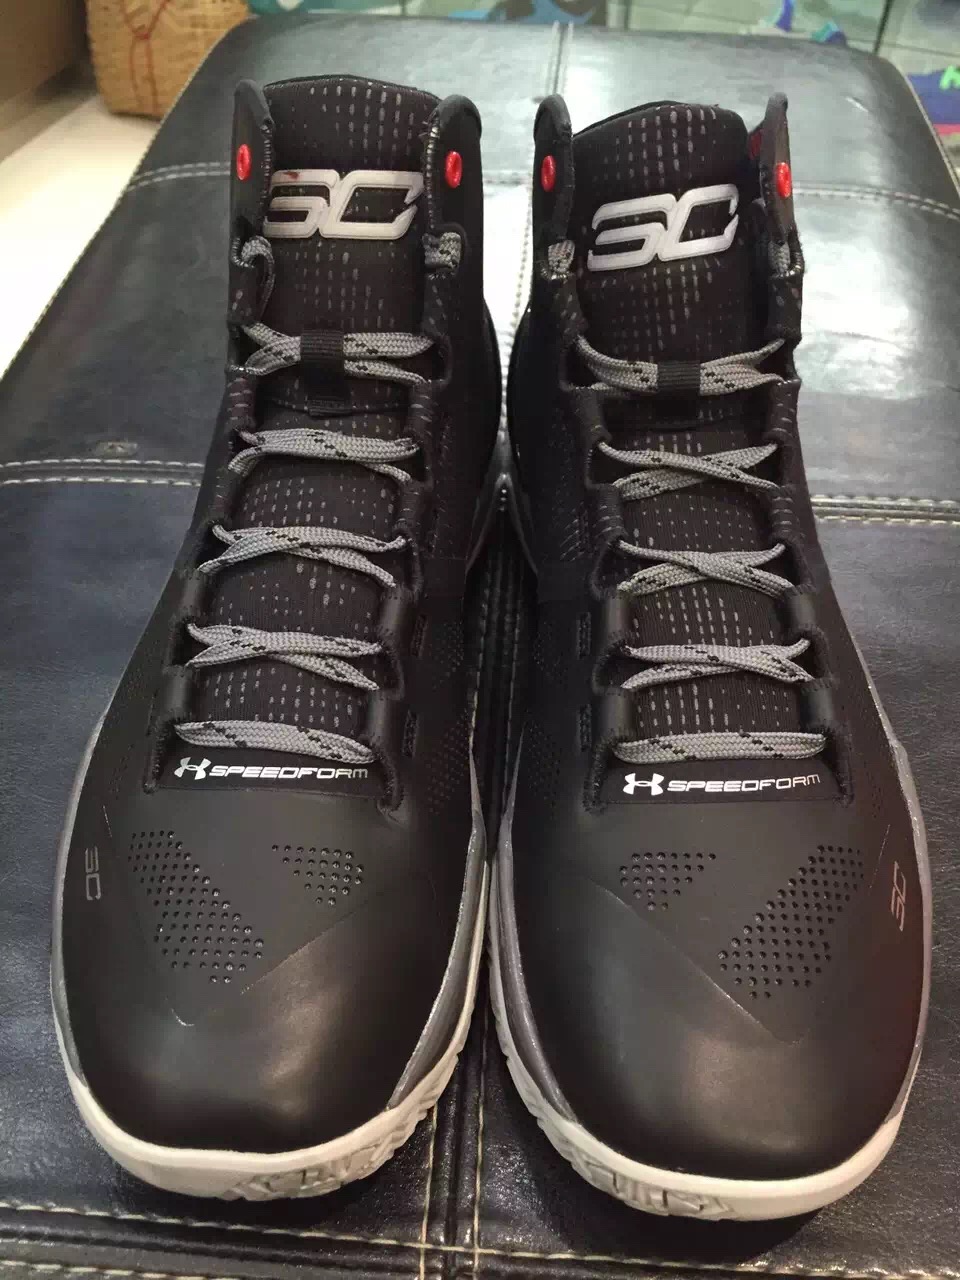 Under Armour Curry 2 The Professional